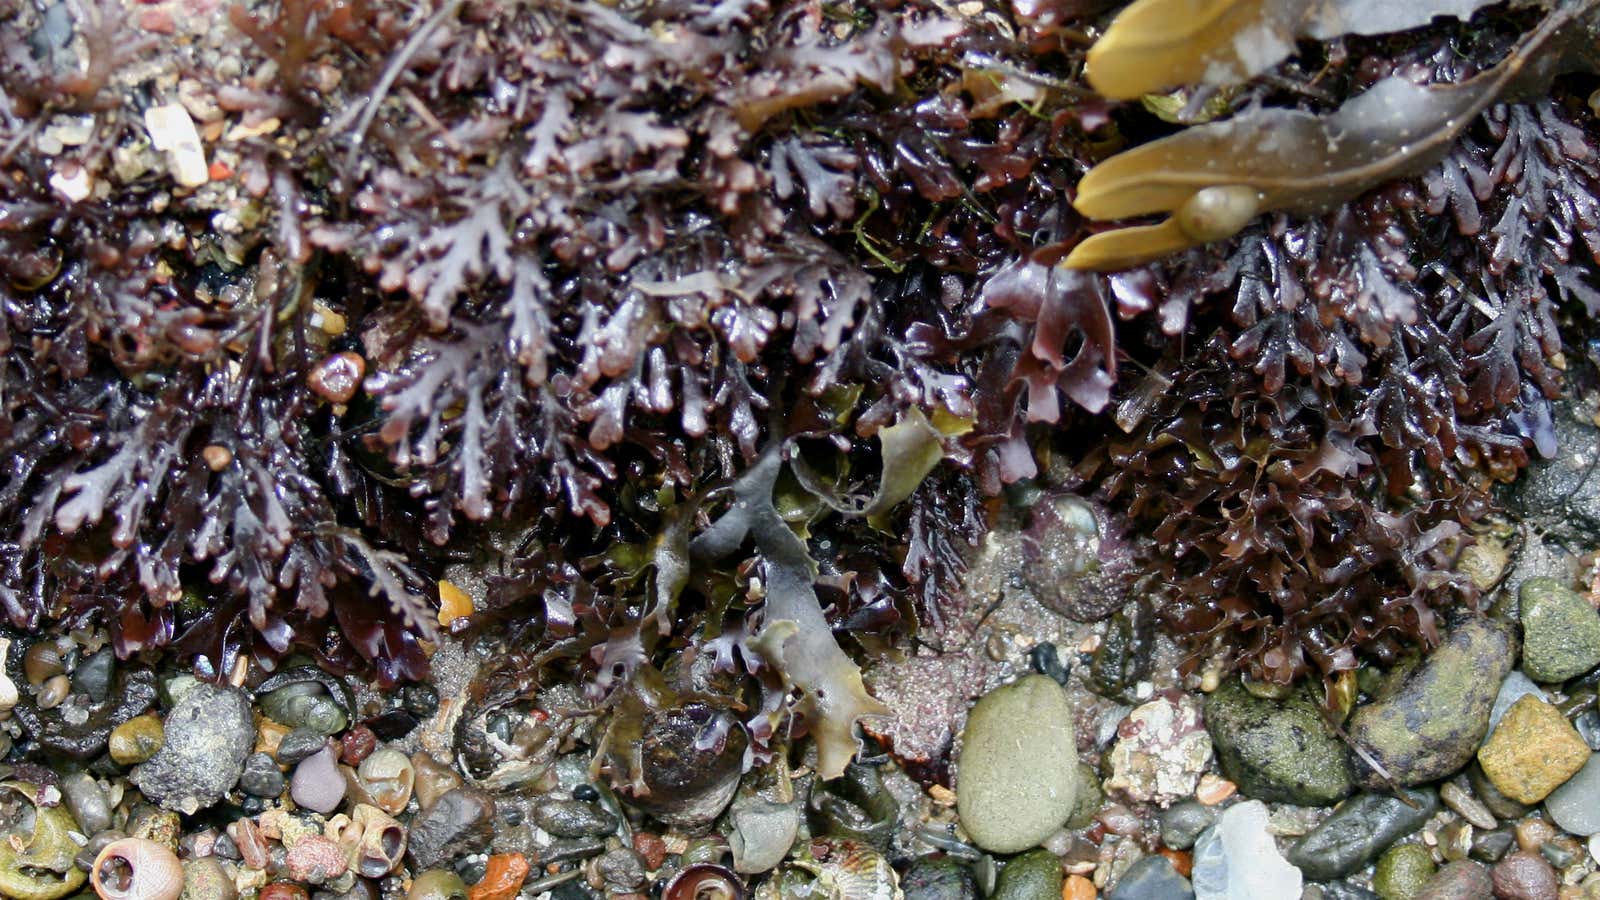 A farmed version of this wild seaweed could be coming to an omelette near you.